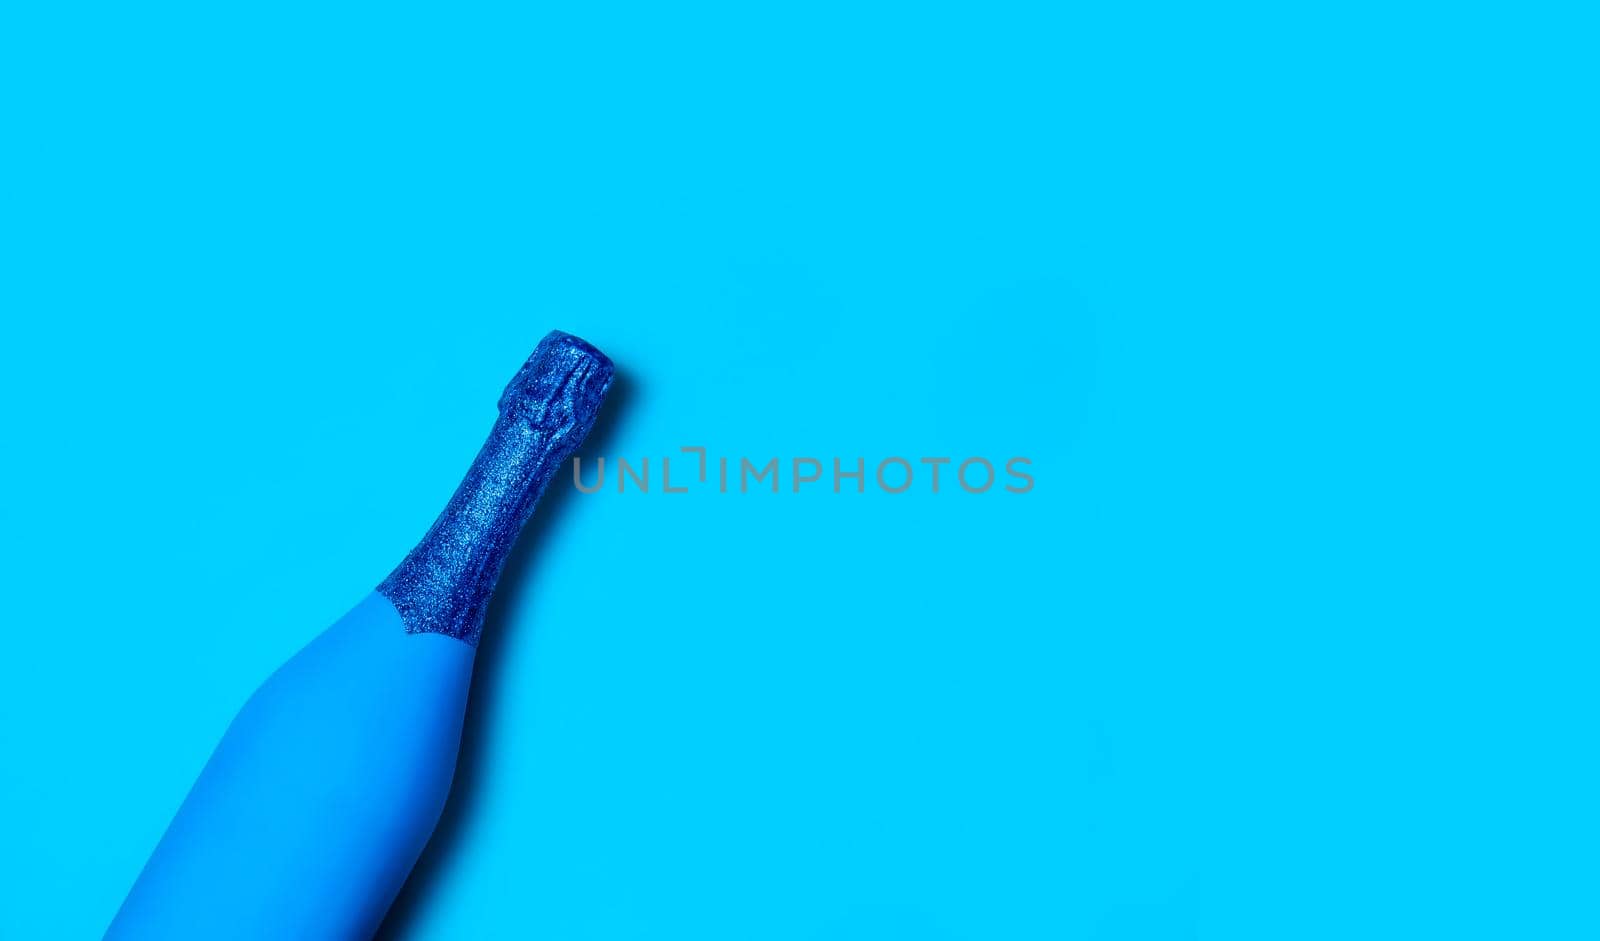 Festive Minimalistic Champagne Bottle on Blue Background. Creative Concept. Classic Blue - Color of the year 2020. Top View. Copy Space For Your Text